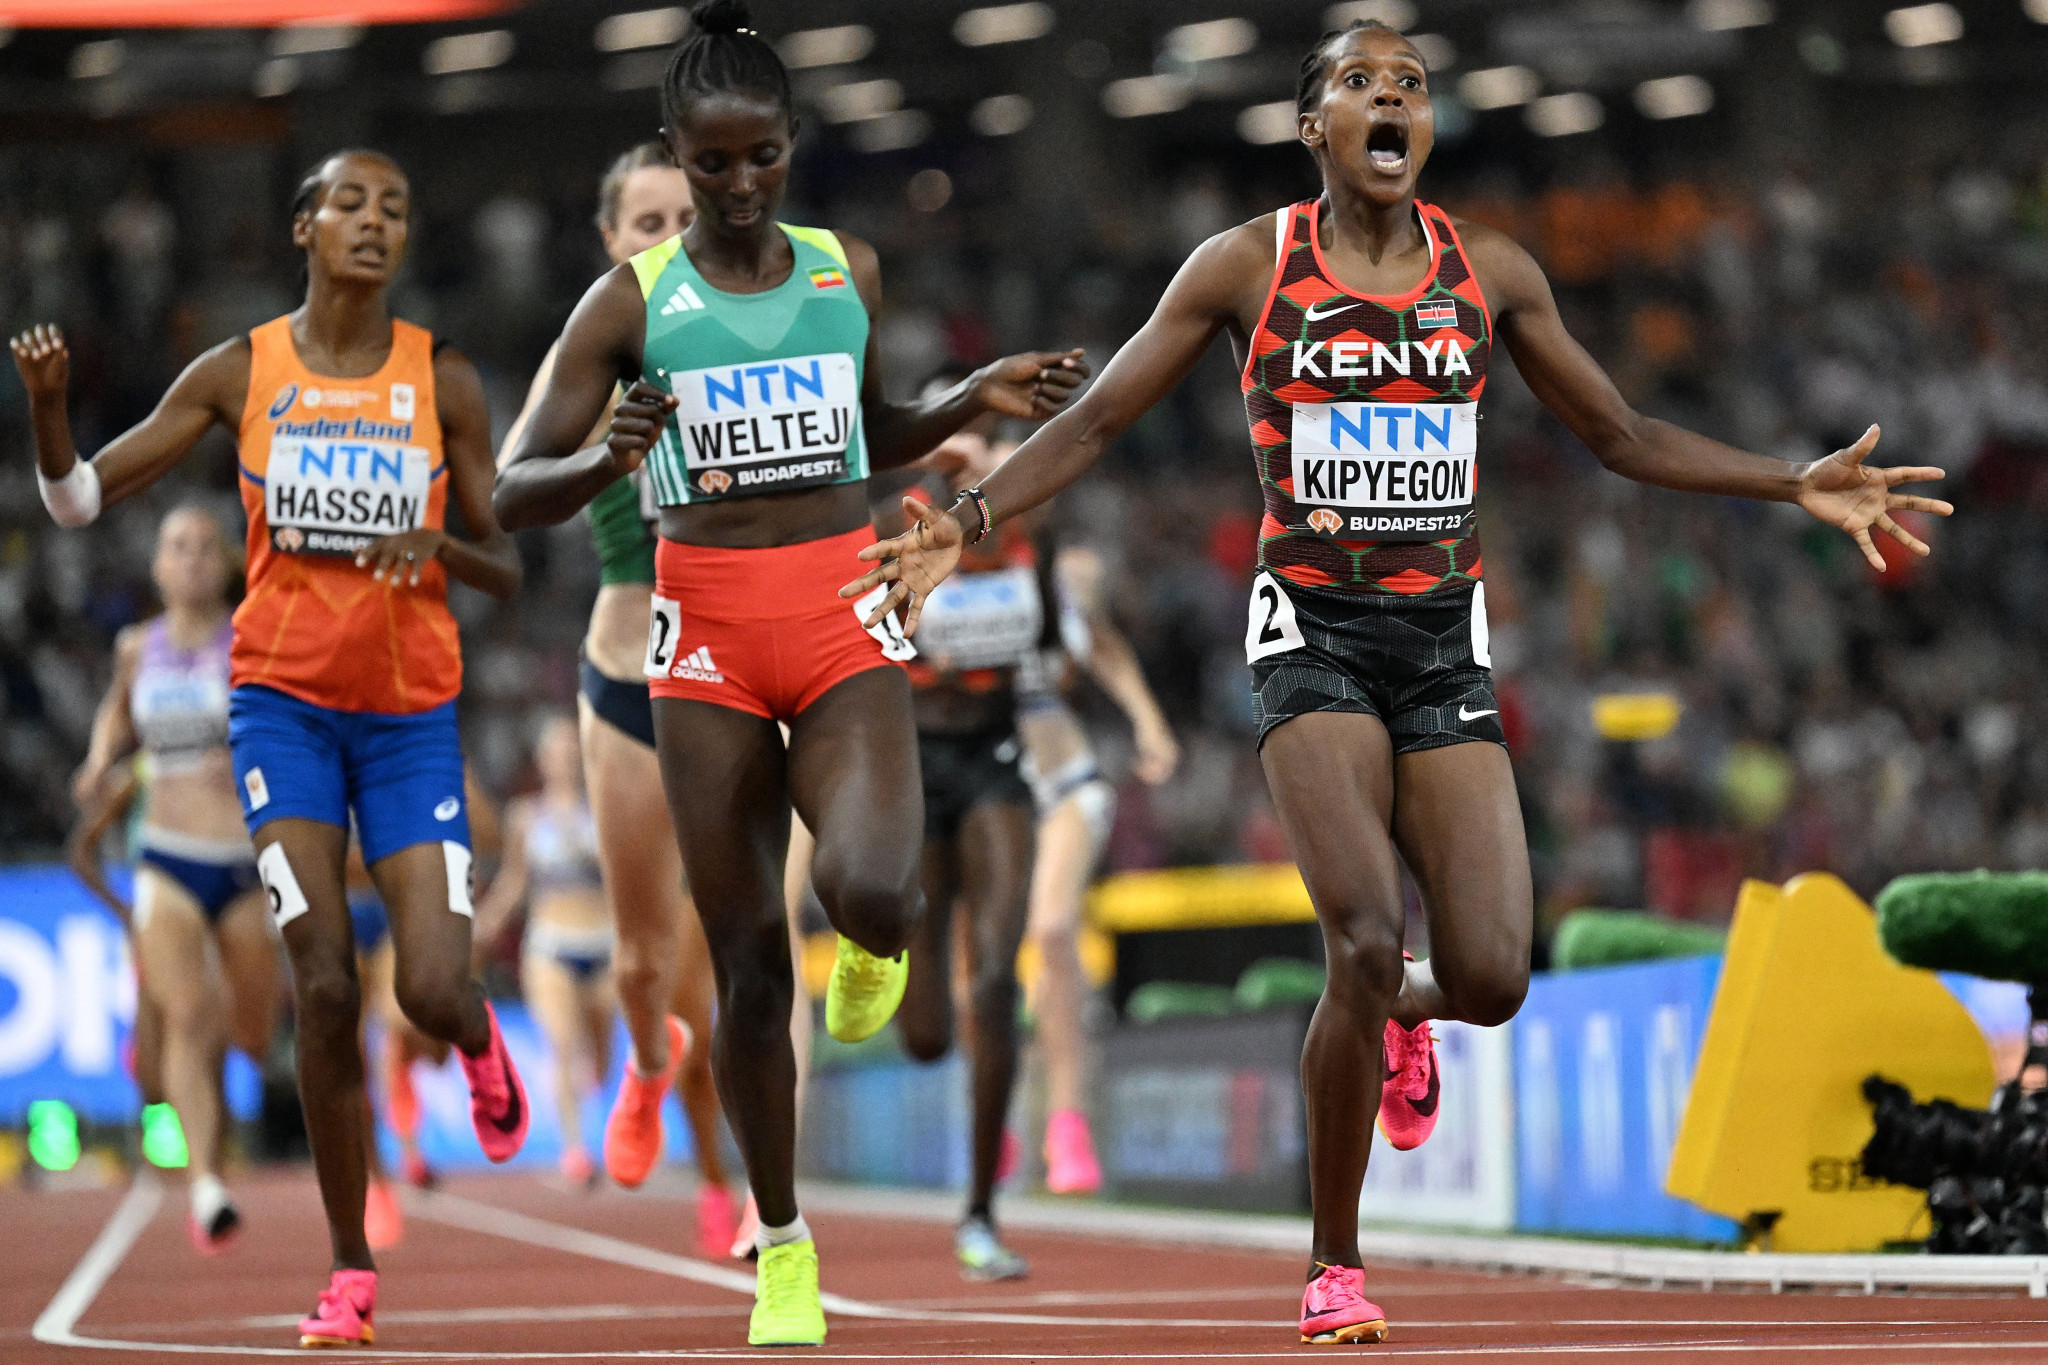 Faith Kipyegon of Kenya, right, claimed a dominant victory in the women's 1500m final at the World Athletics Championships ©Getty Images